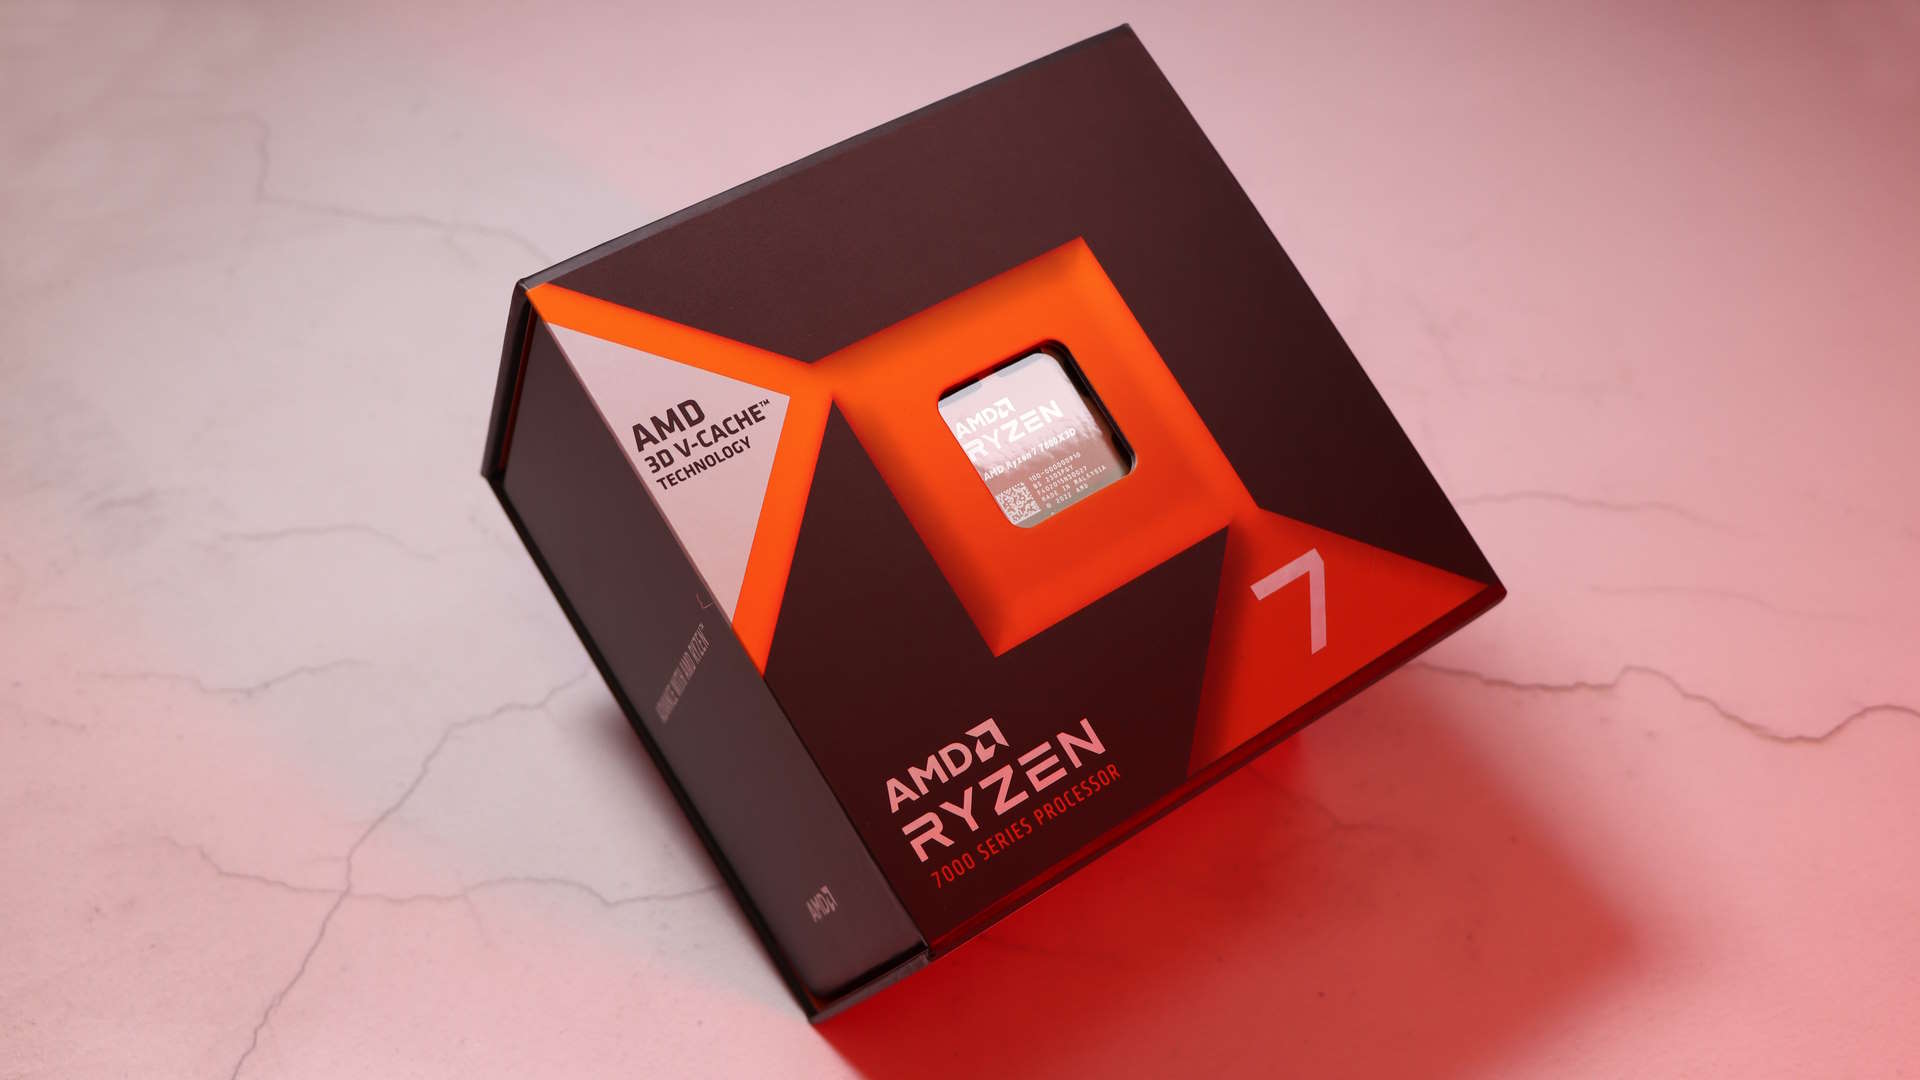 AMD Ryzen 7 7800X3D review: 3D V-Cache for the people